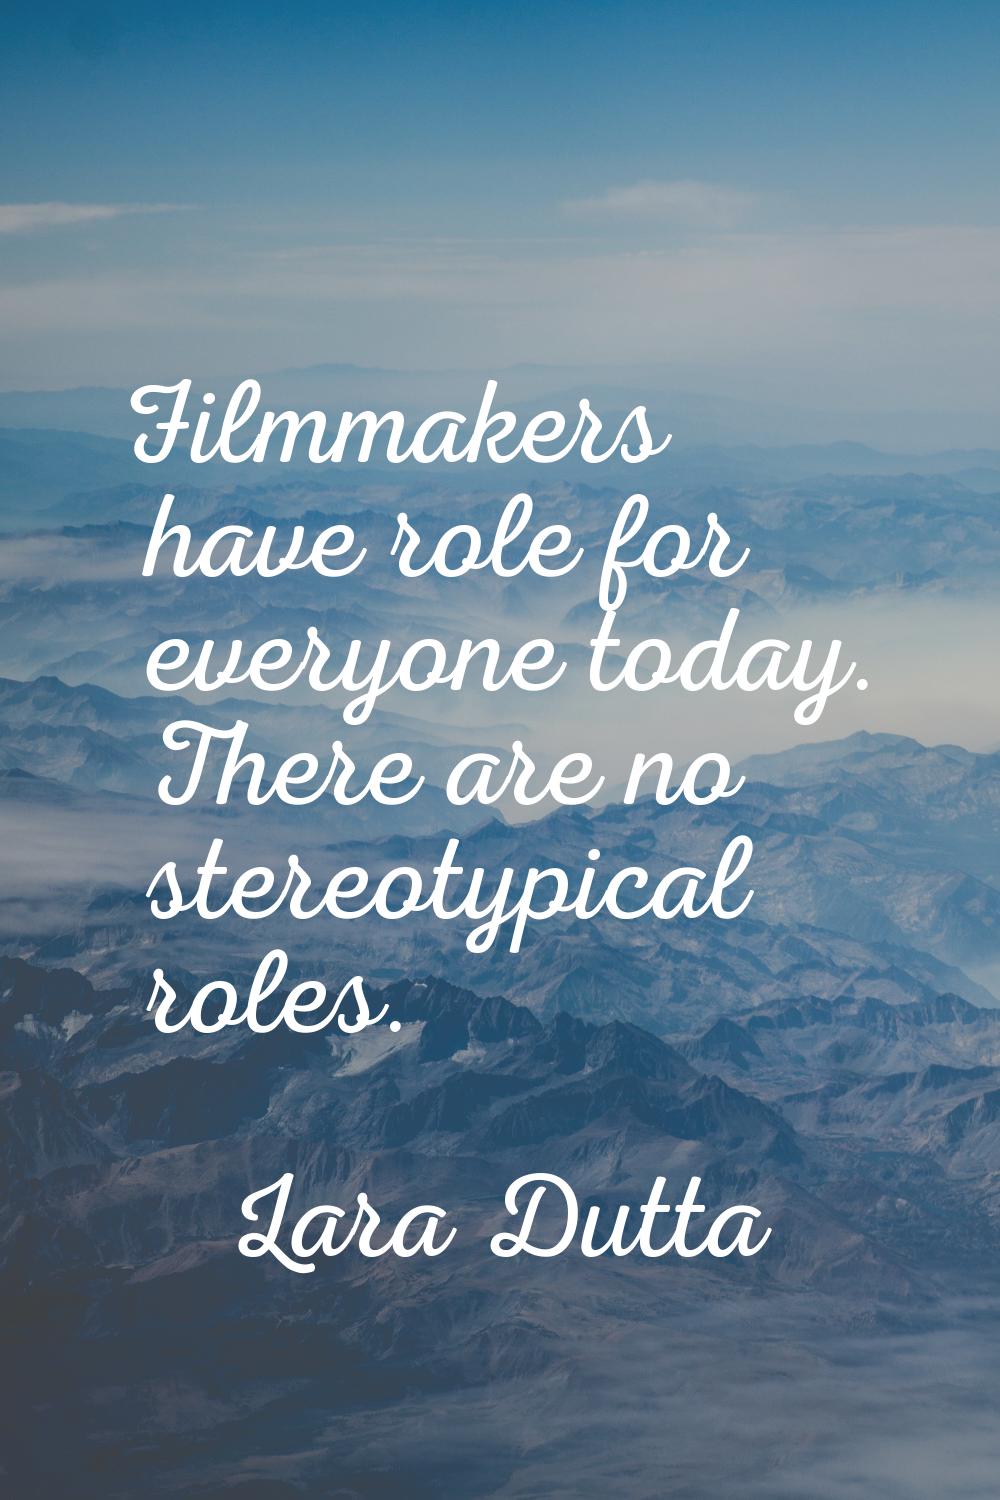 Filmmakers have role for everyone today. There are no stereotypical roles.